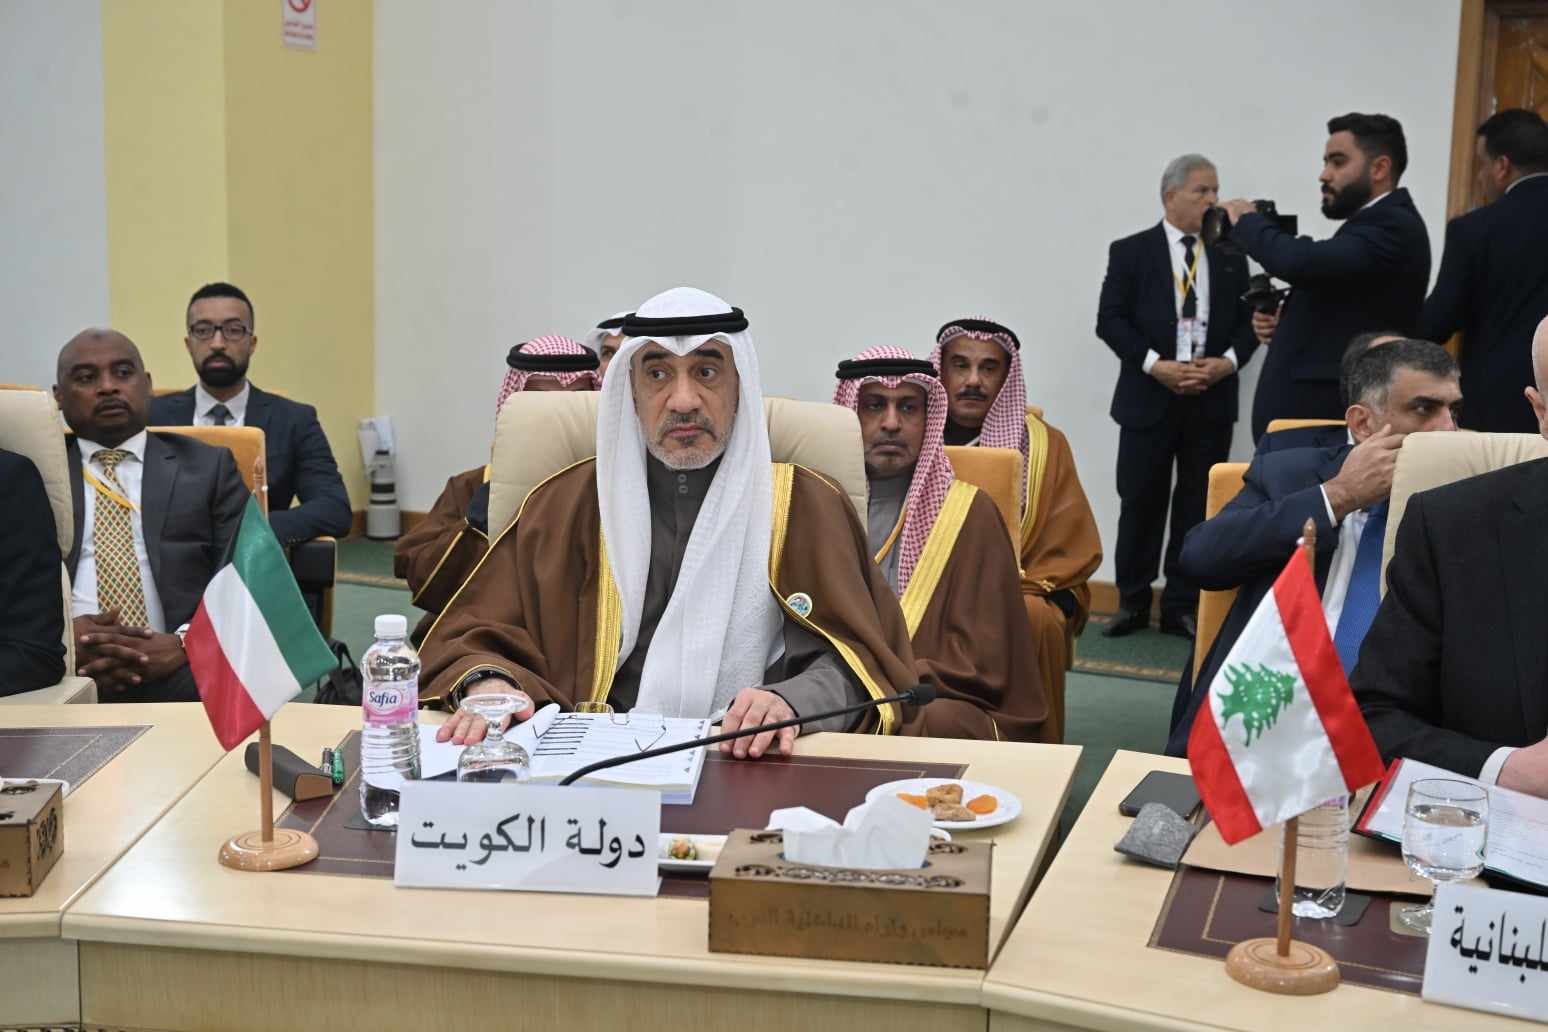 Kuwait's Deputy Prime Minister, Minister of Defense and Acting Minister of Interior Sheikh Fahad Yousef Saud Al-Sabah Addressing the 41st session of the Arab Interior Ministers Council